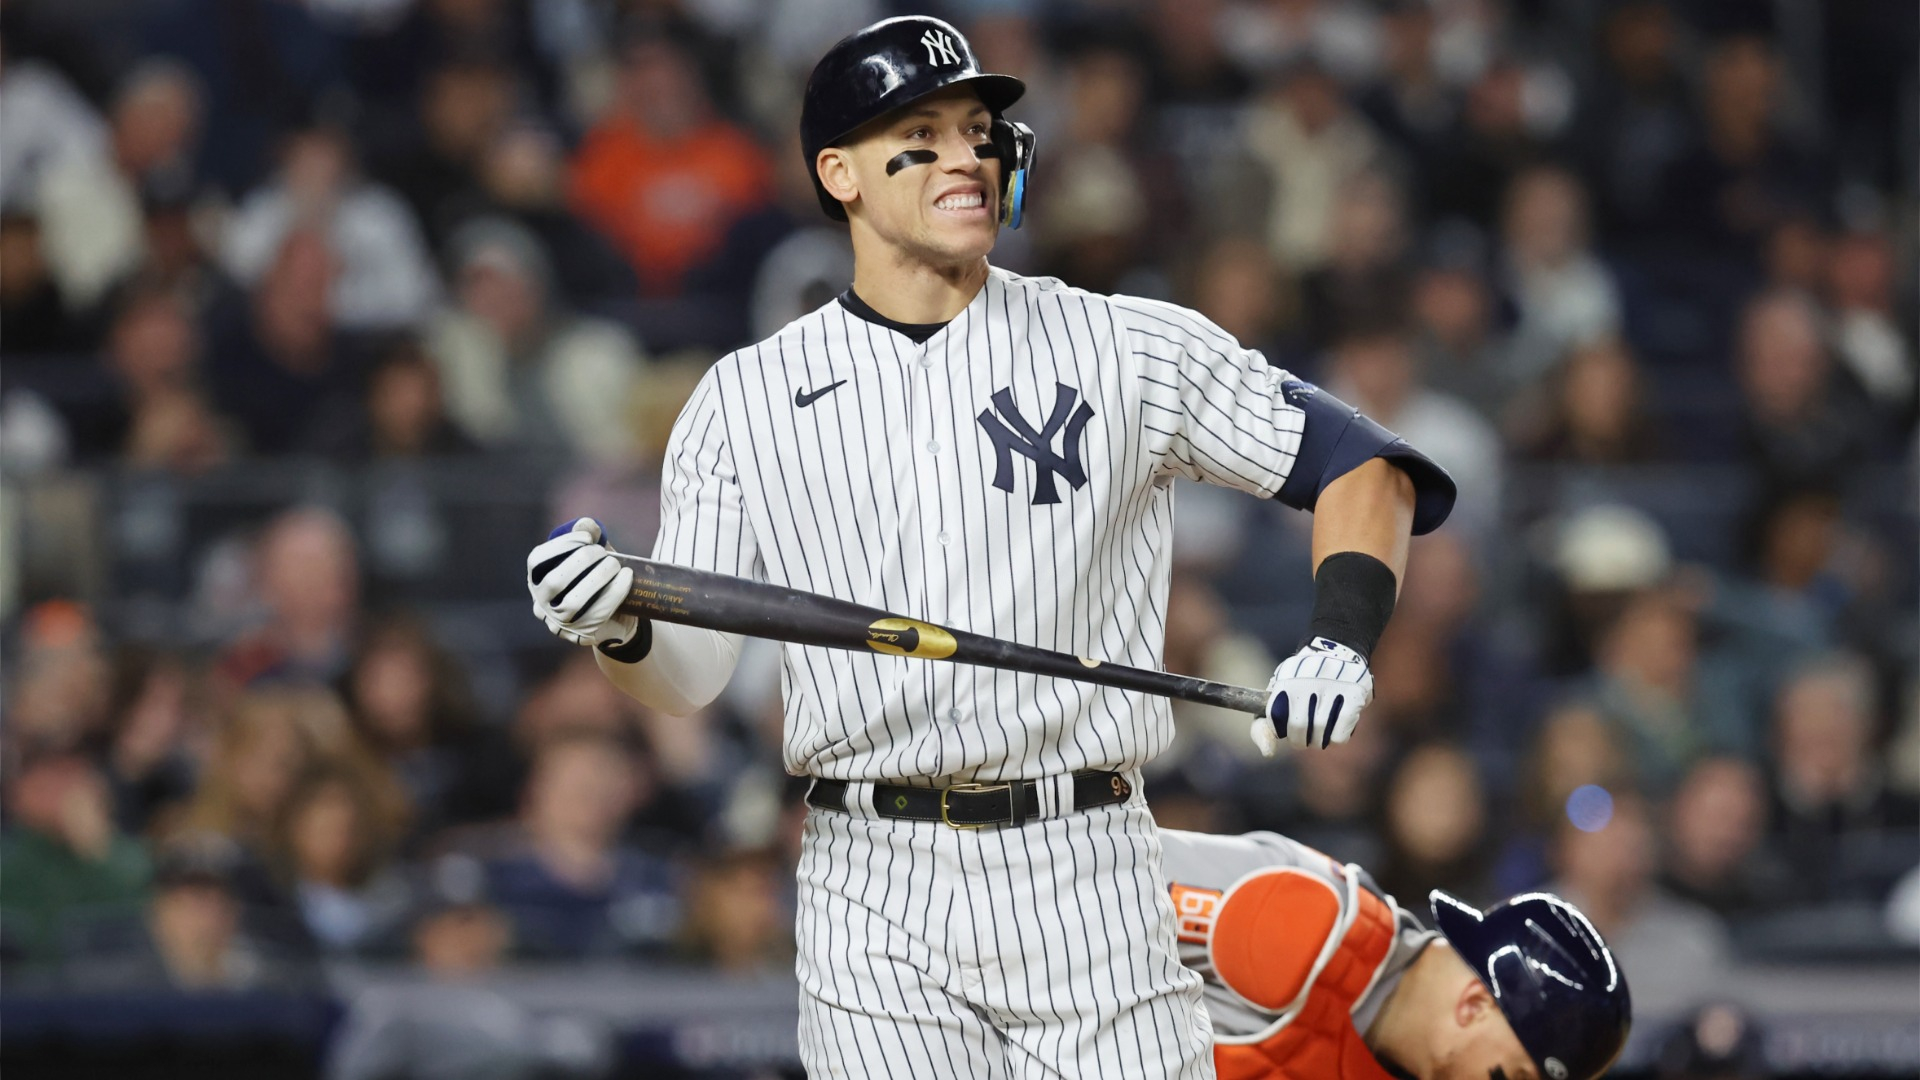 Giants ownership could push to sign Aaron Judge, Buster Olney